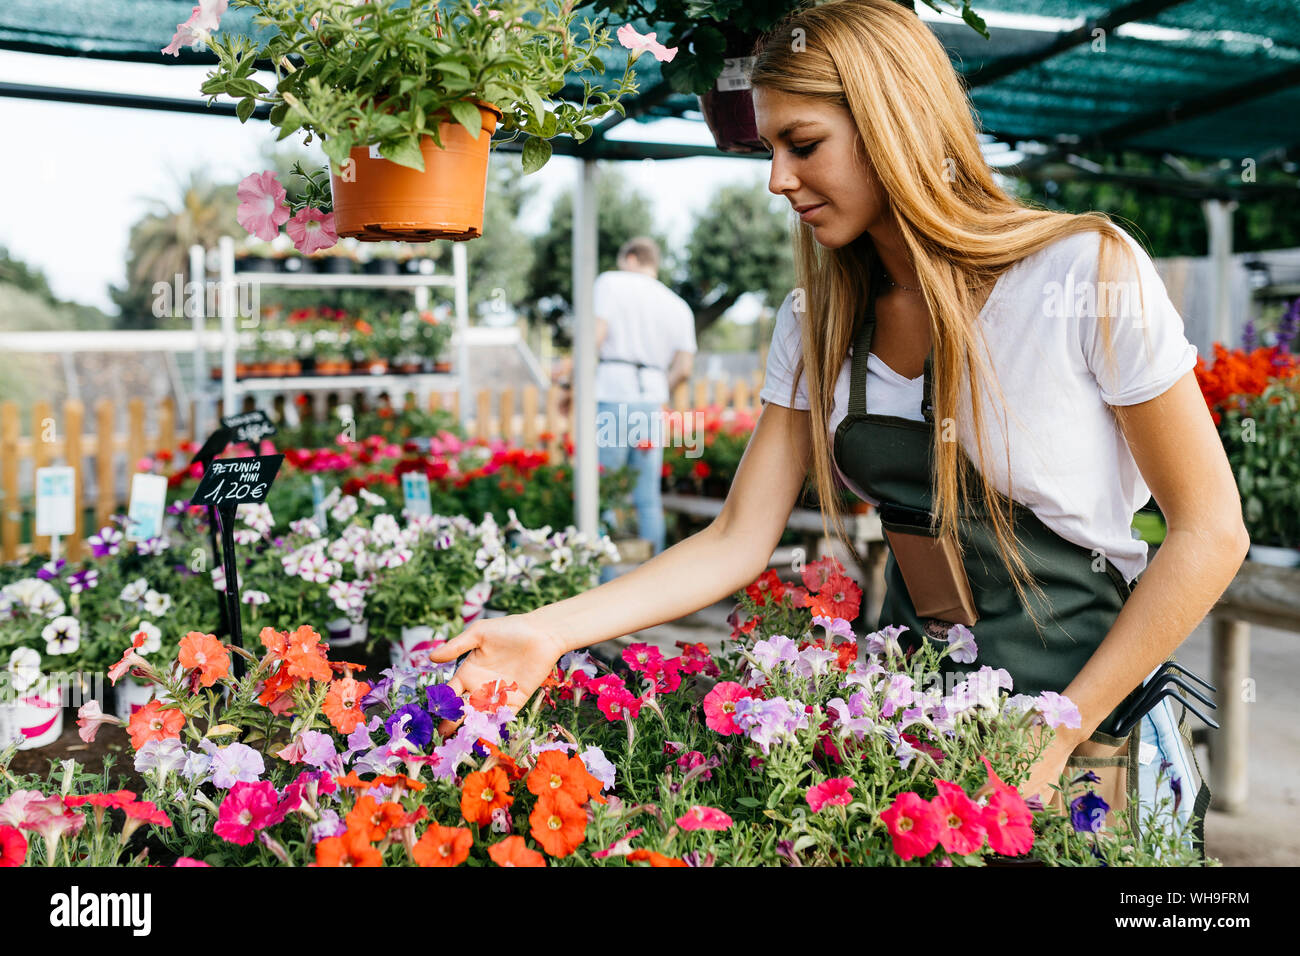 Female worker in a garden center caring for flowers Stock Photo